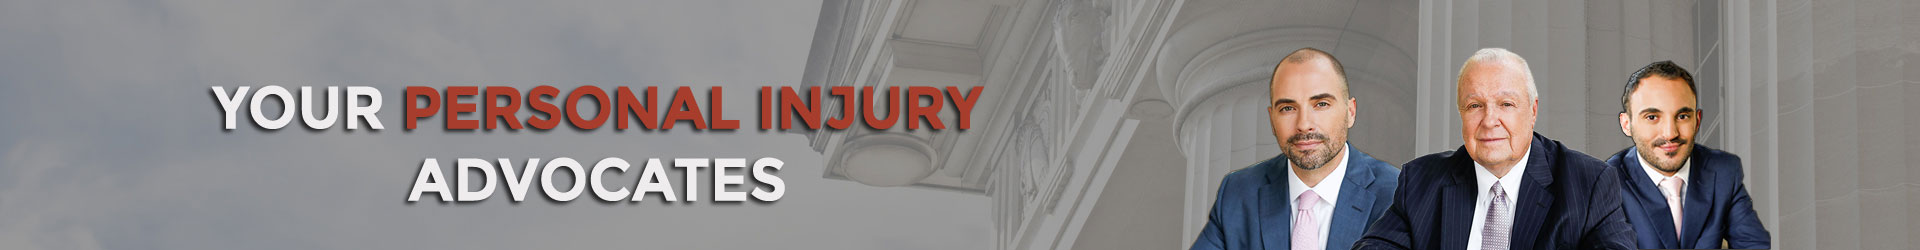 Trusted Lake Charles Personal Injury Attorneys